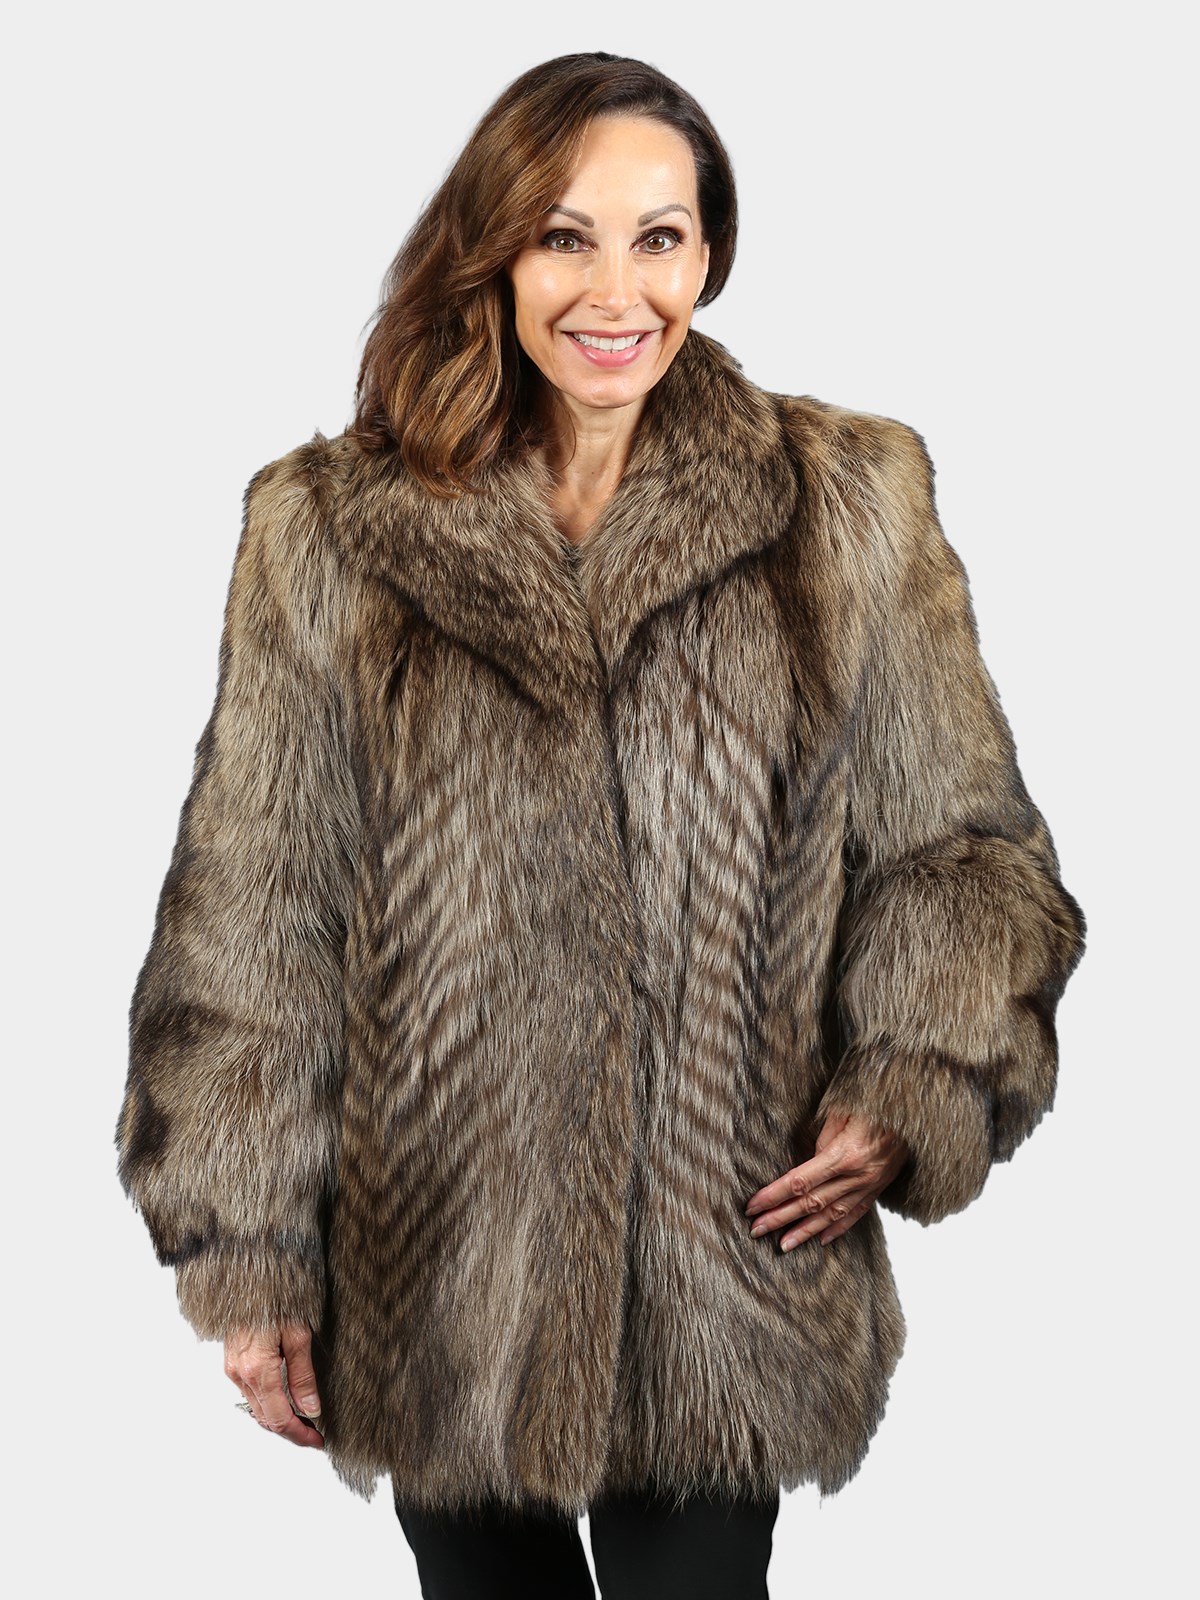 Woman's Natural Feathered Racoon Fur Jacket